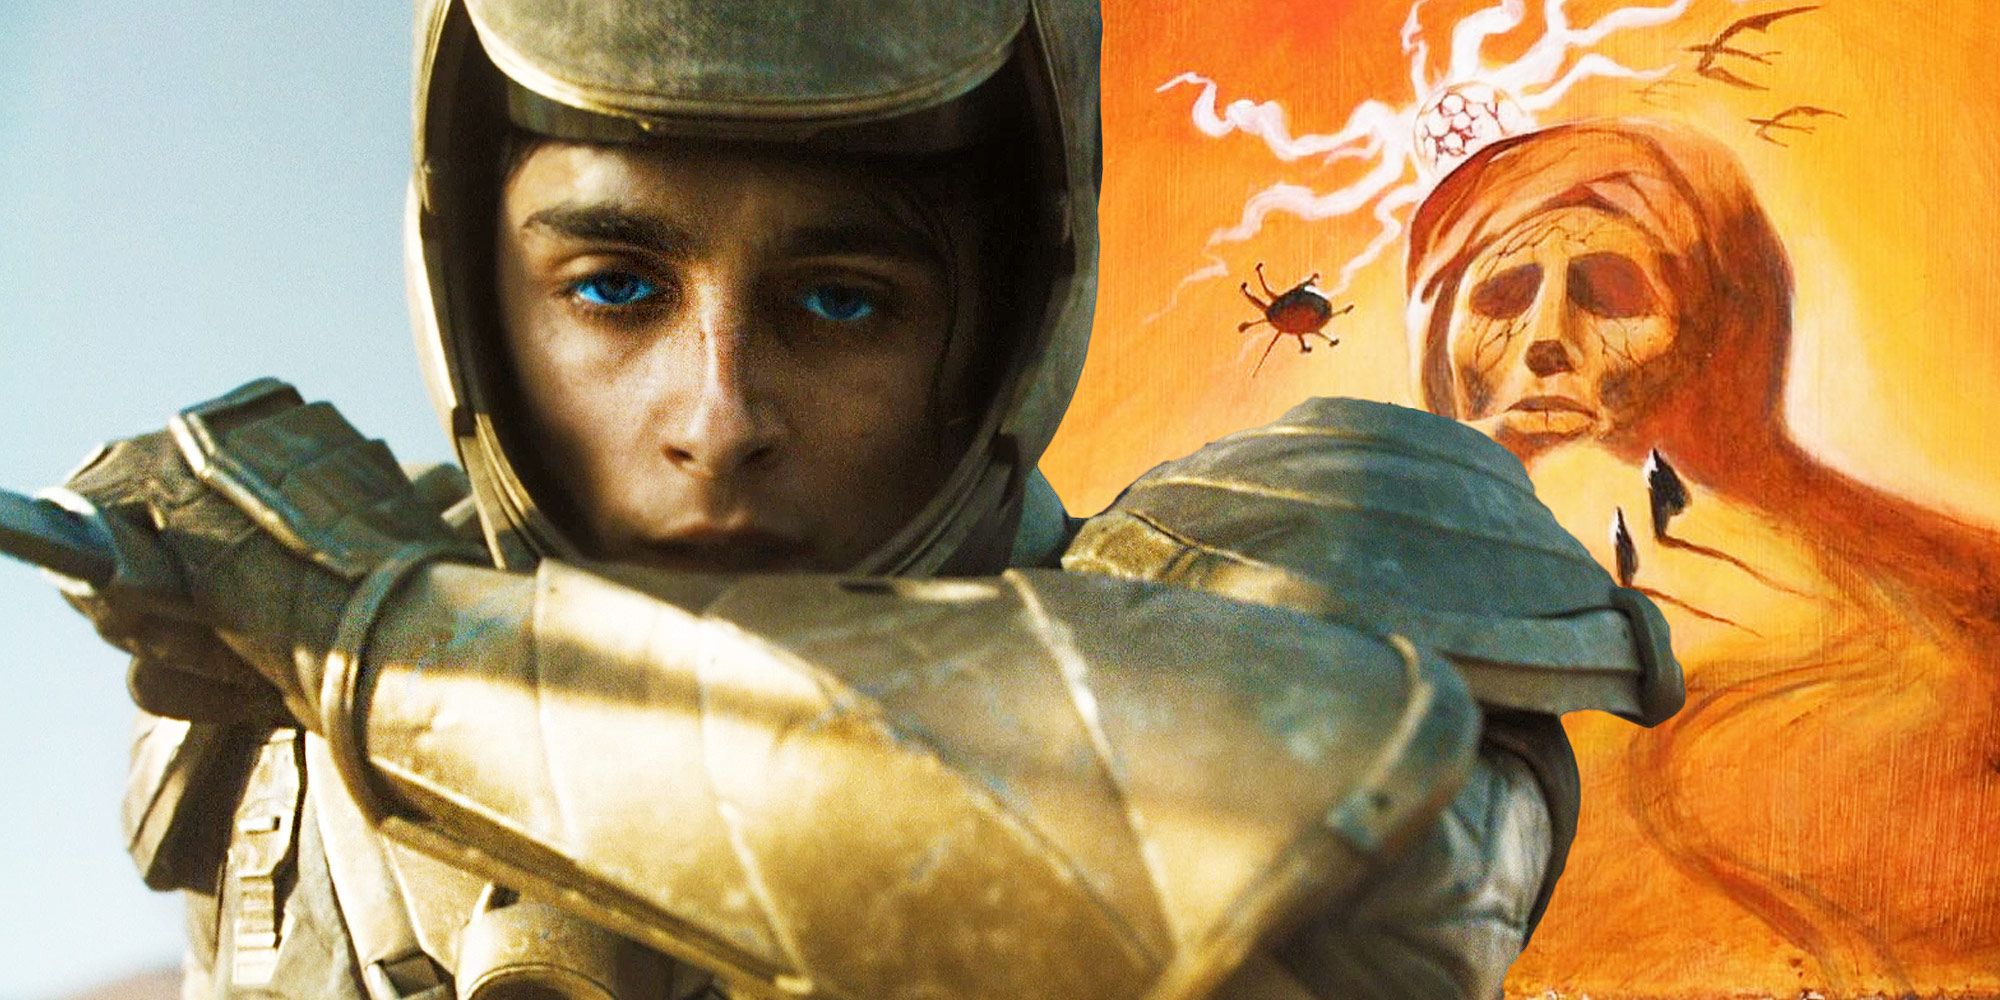 Cover Art for Dune Messiah with Paul Atreides in golden armor